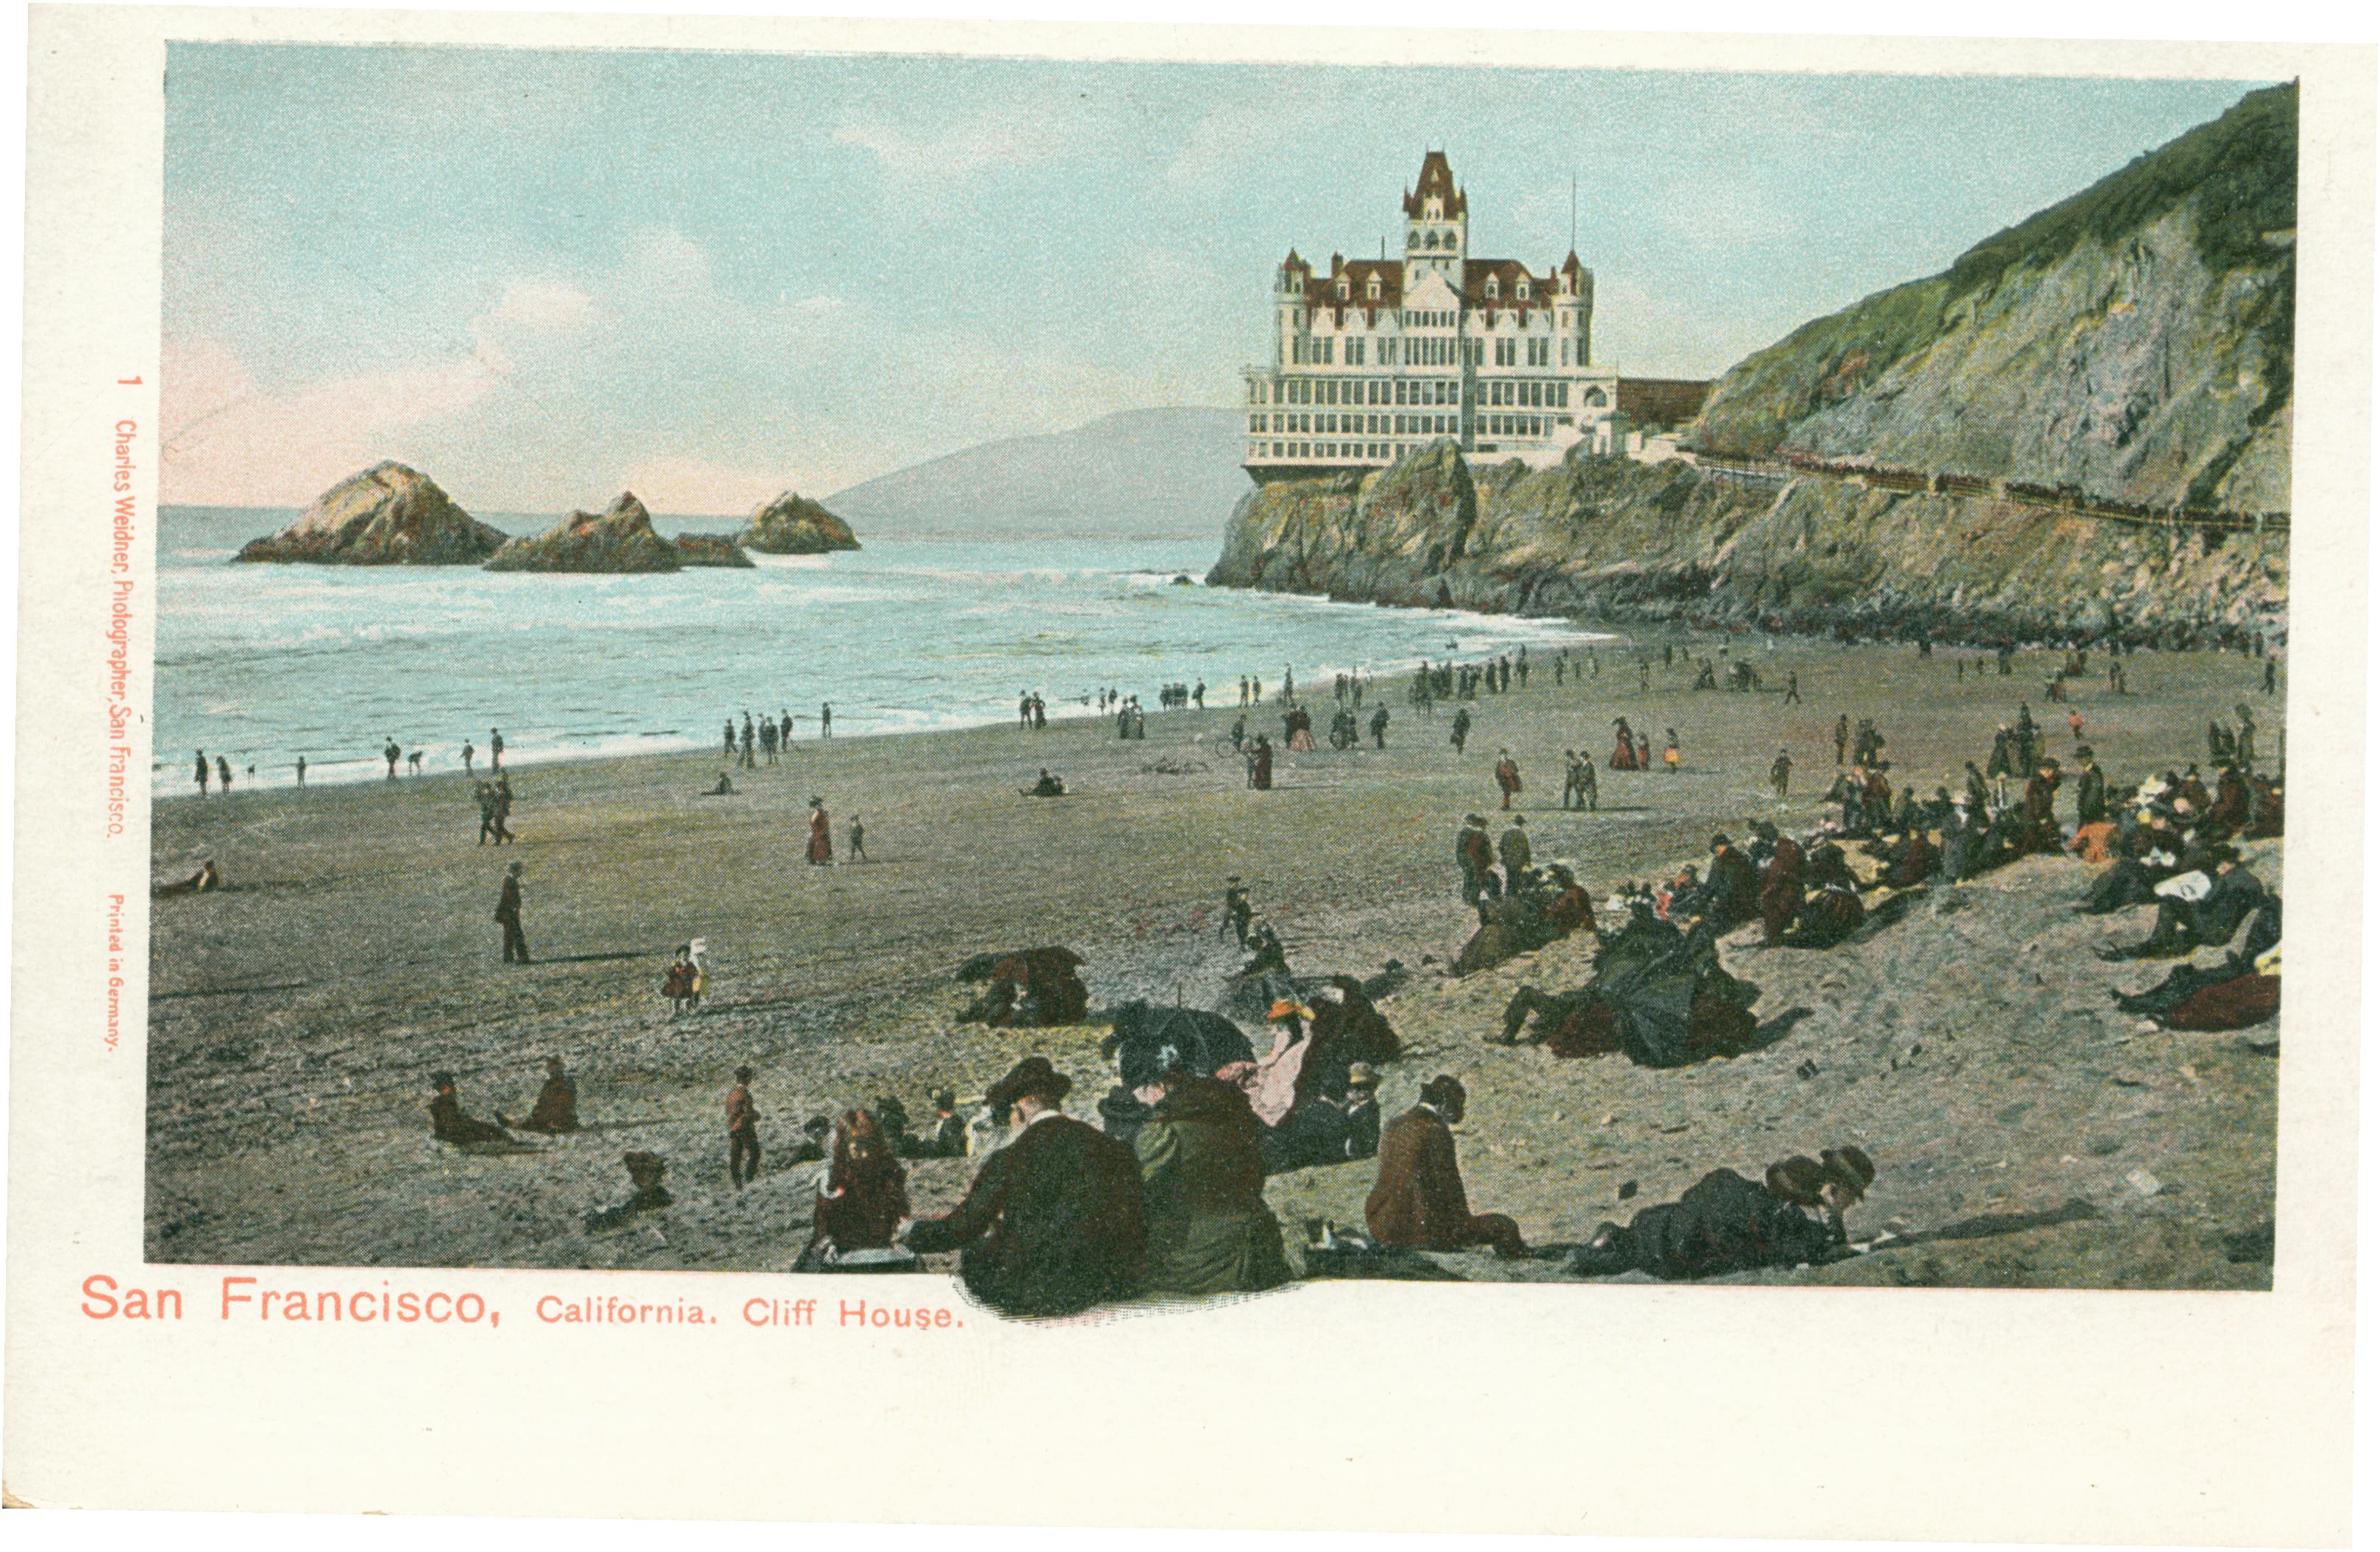 Shows the Cliff House and Seal Rocks, with several individuals on the beach in the foreground.